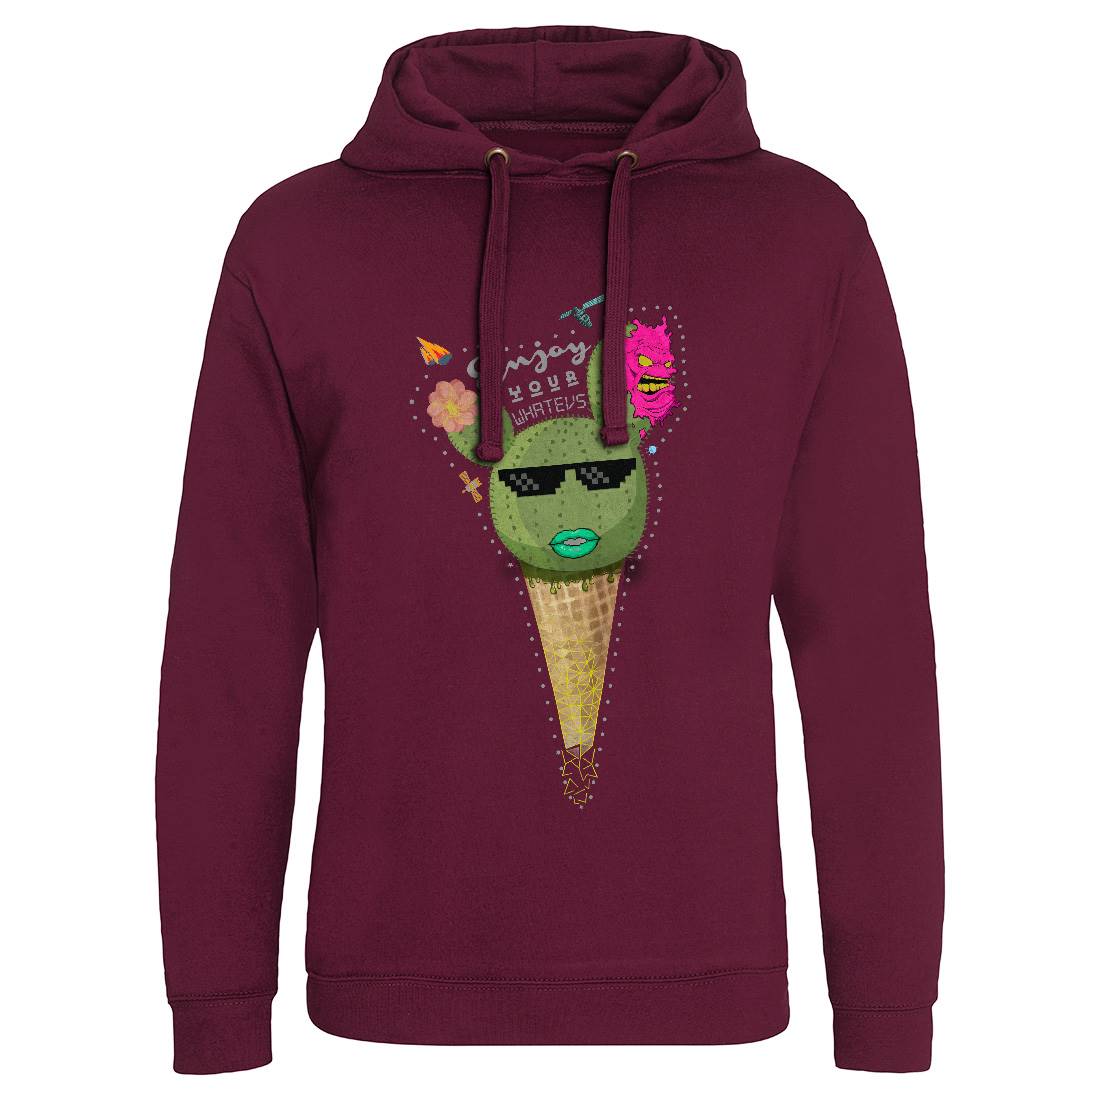 Eyw Enjoy Yours Watevs Mens Hoodie Without Pocket Food A833